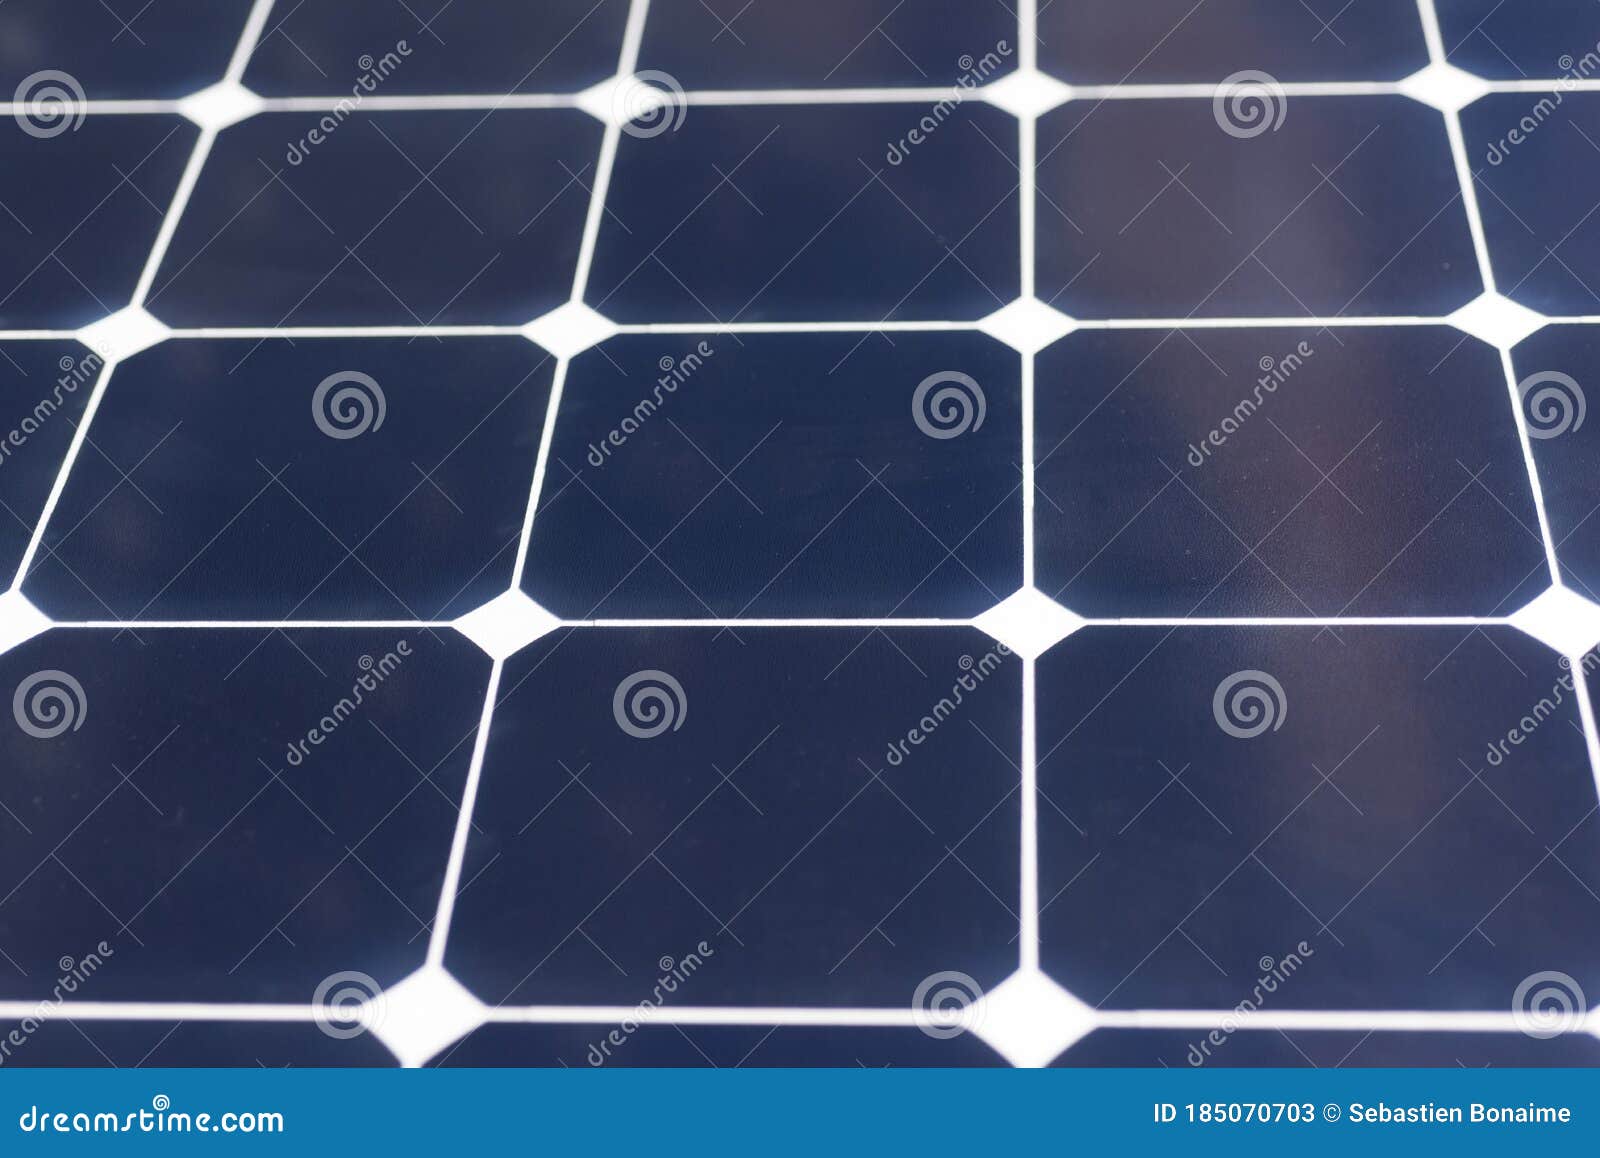 abstract image of solar panels details